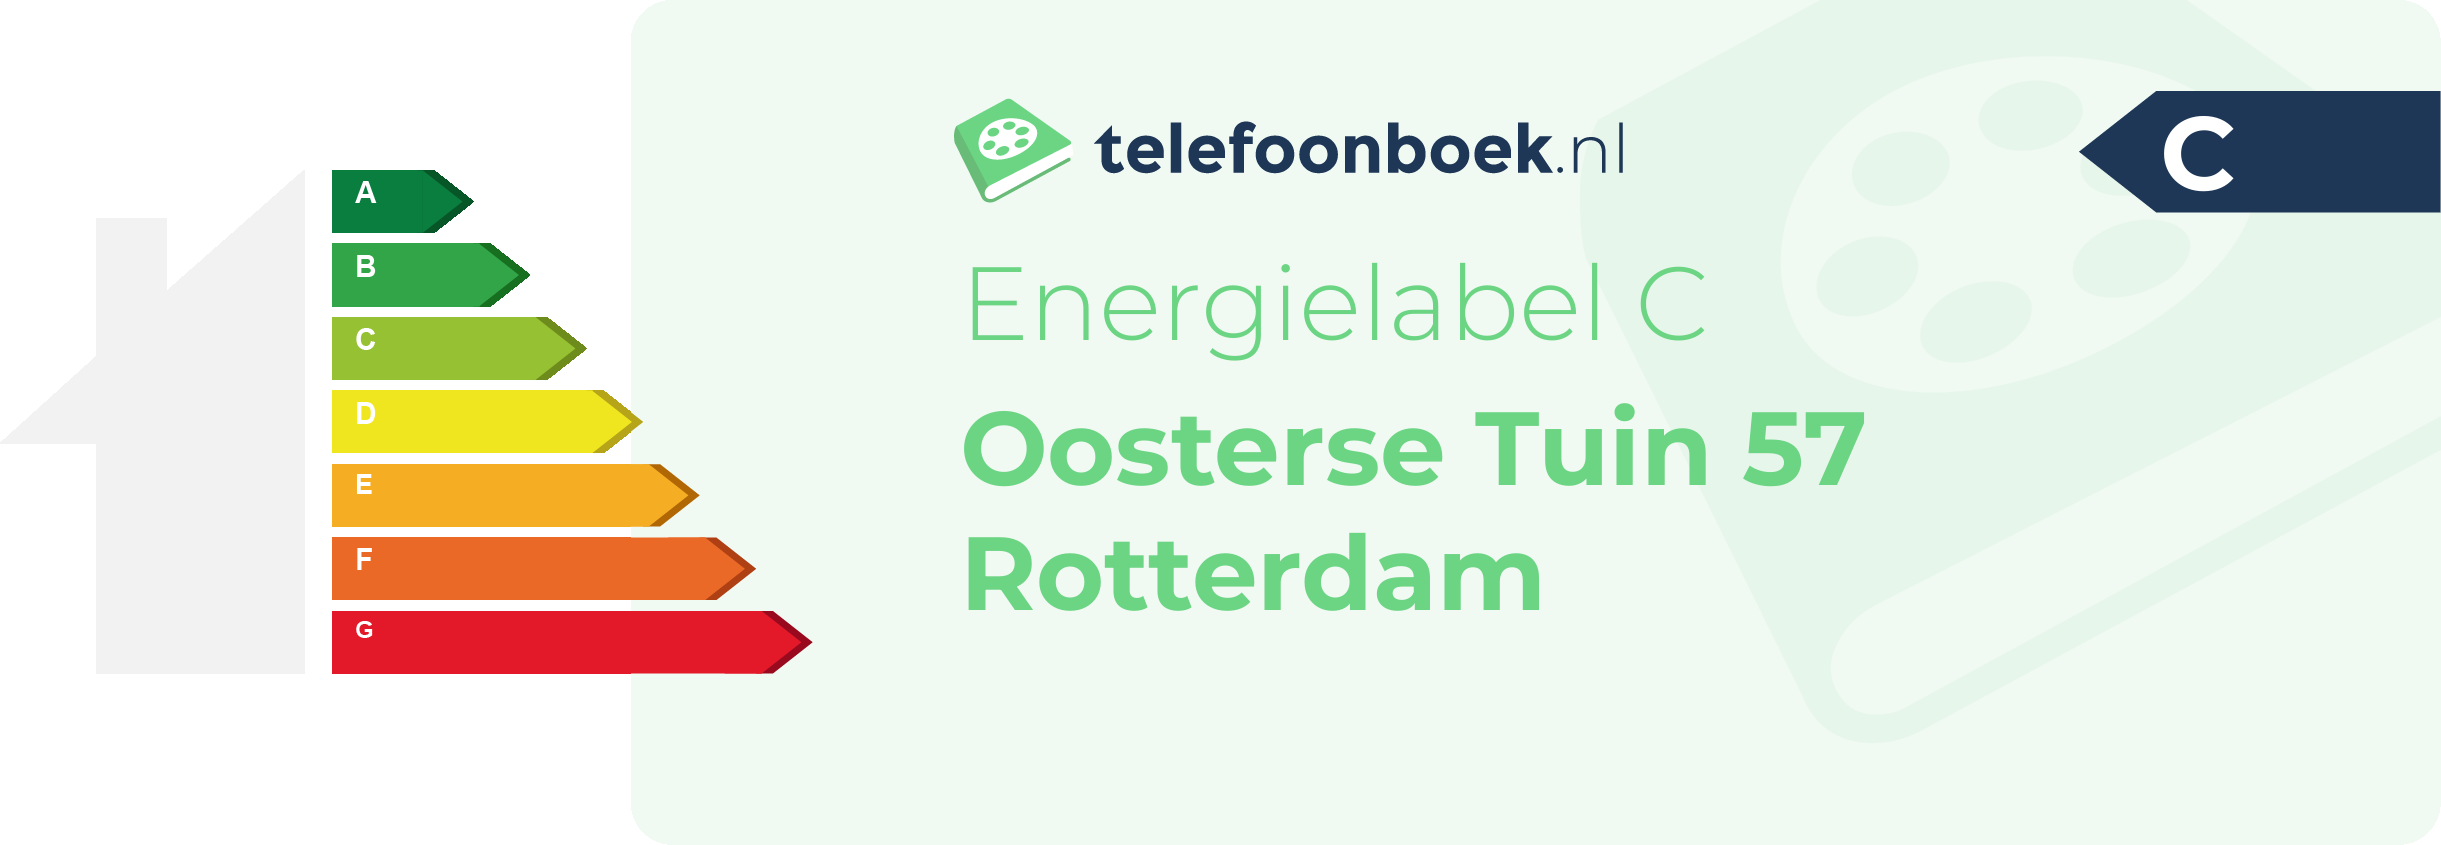 Energielabel Oosterse Tuin 57 Rotterdam